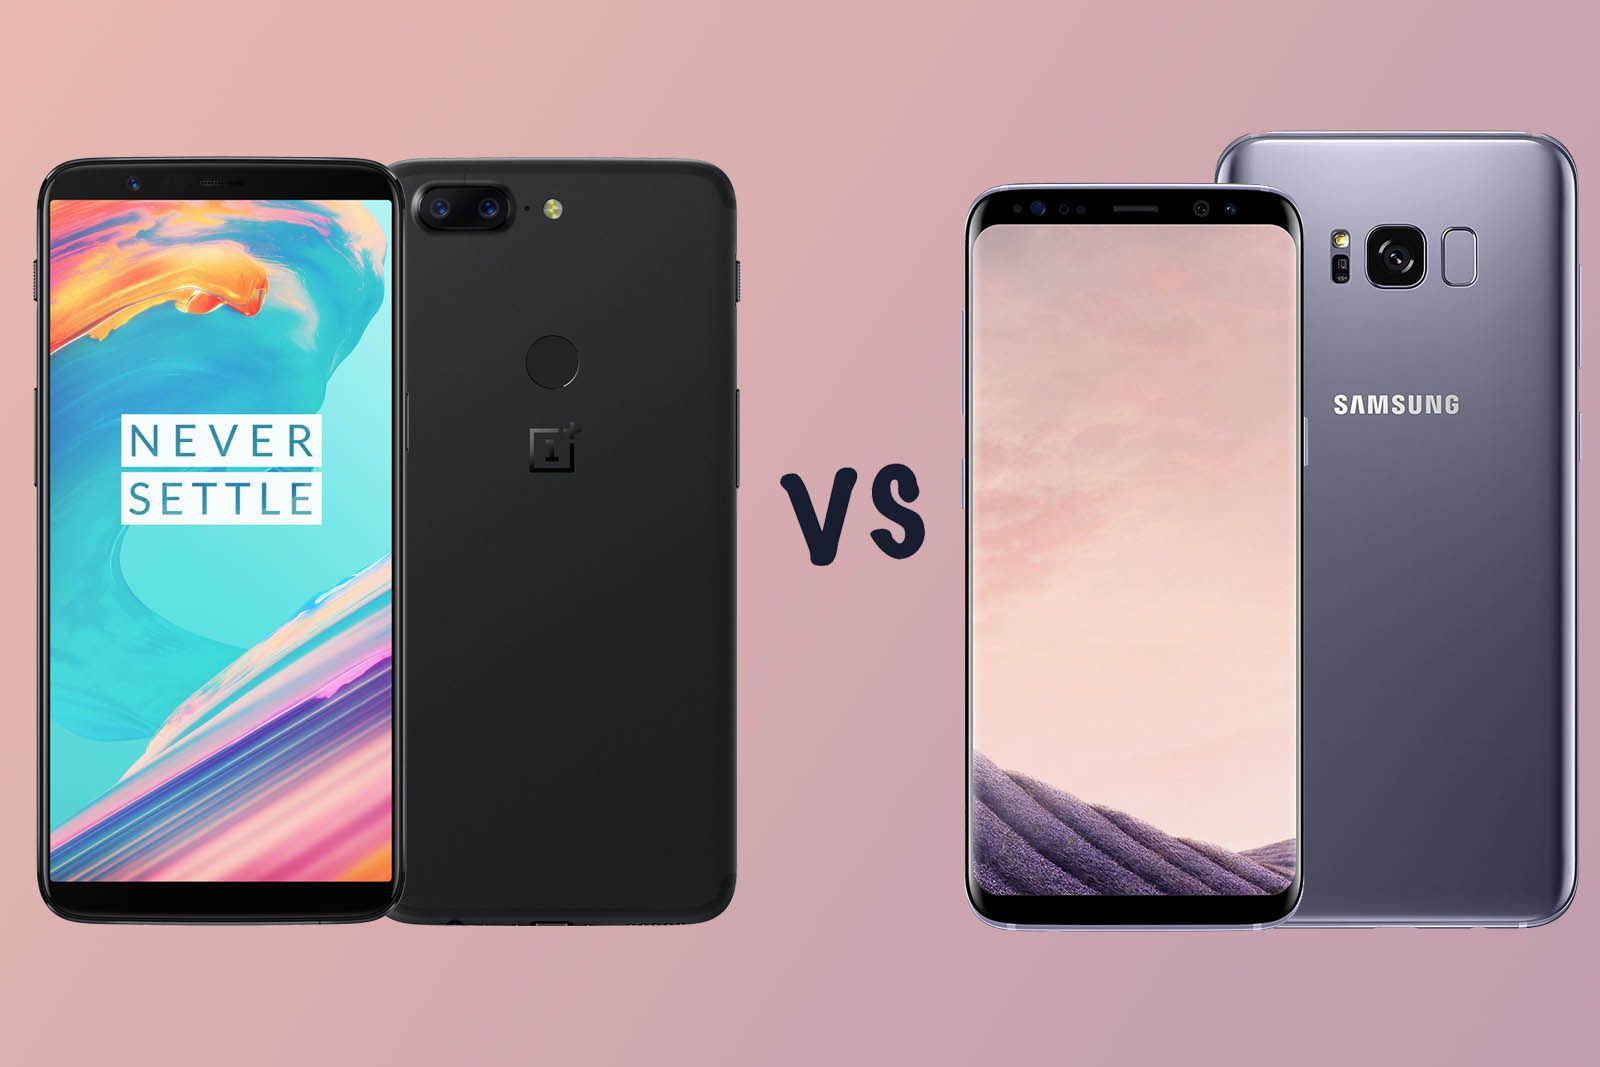 OnePlus 5T vs Samsung Galaxy S8 vs Galaxy S8 Whats the difference image 1